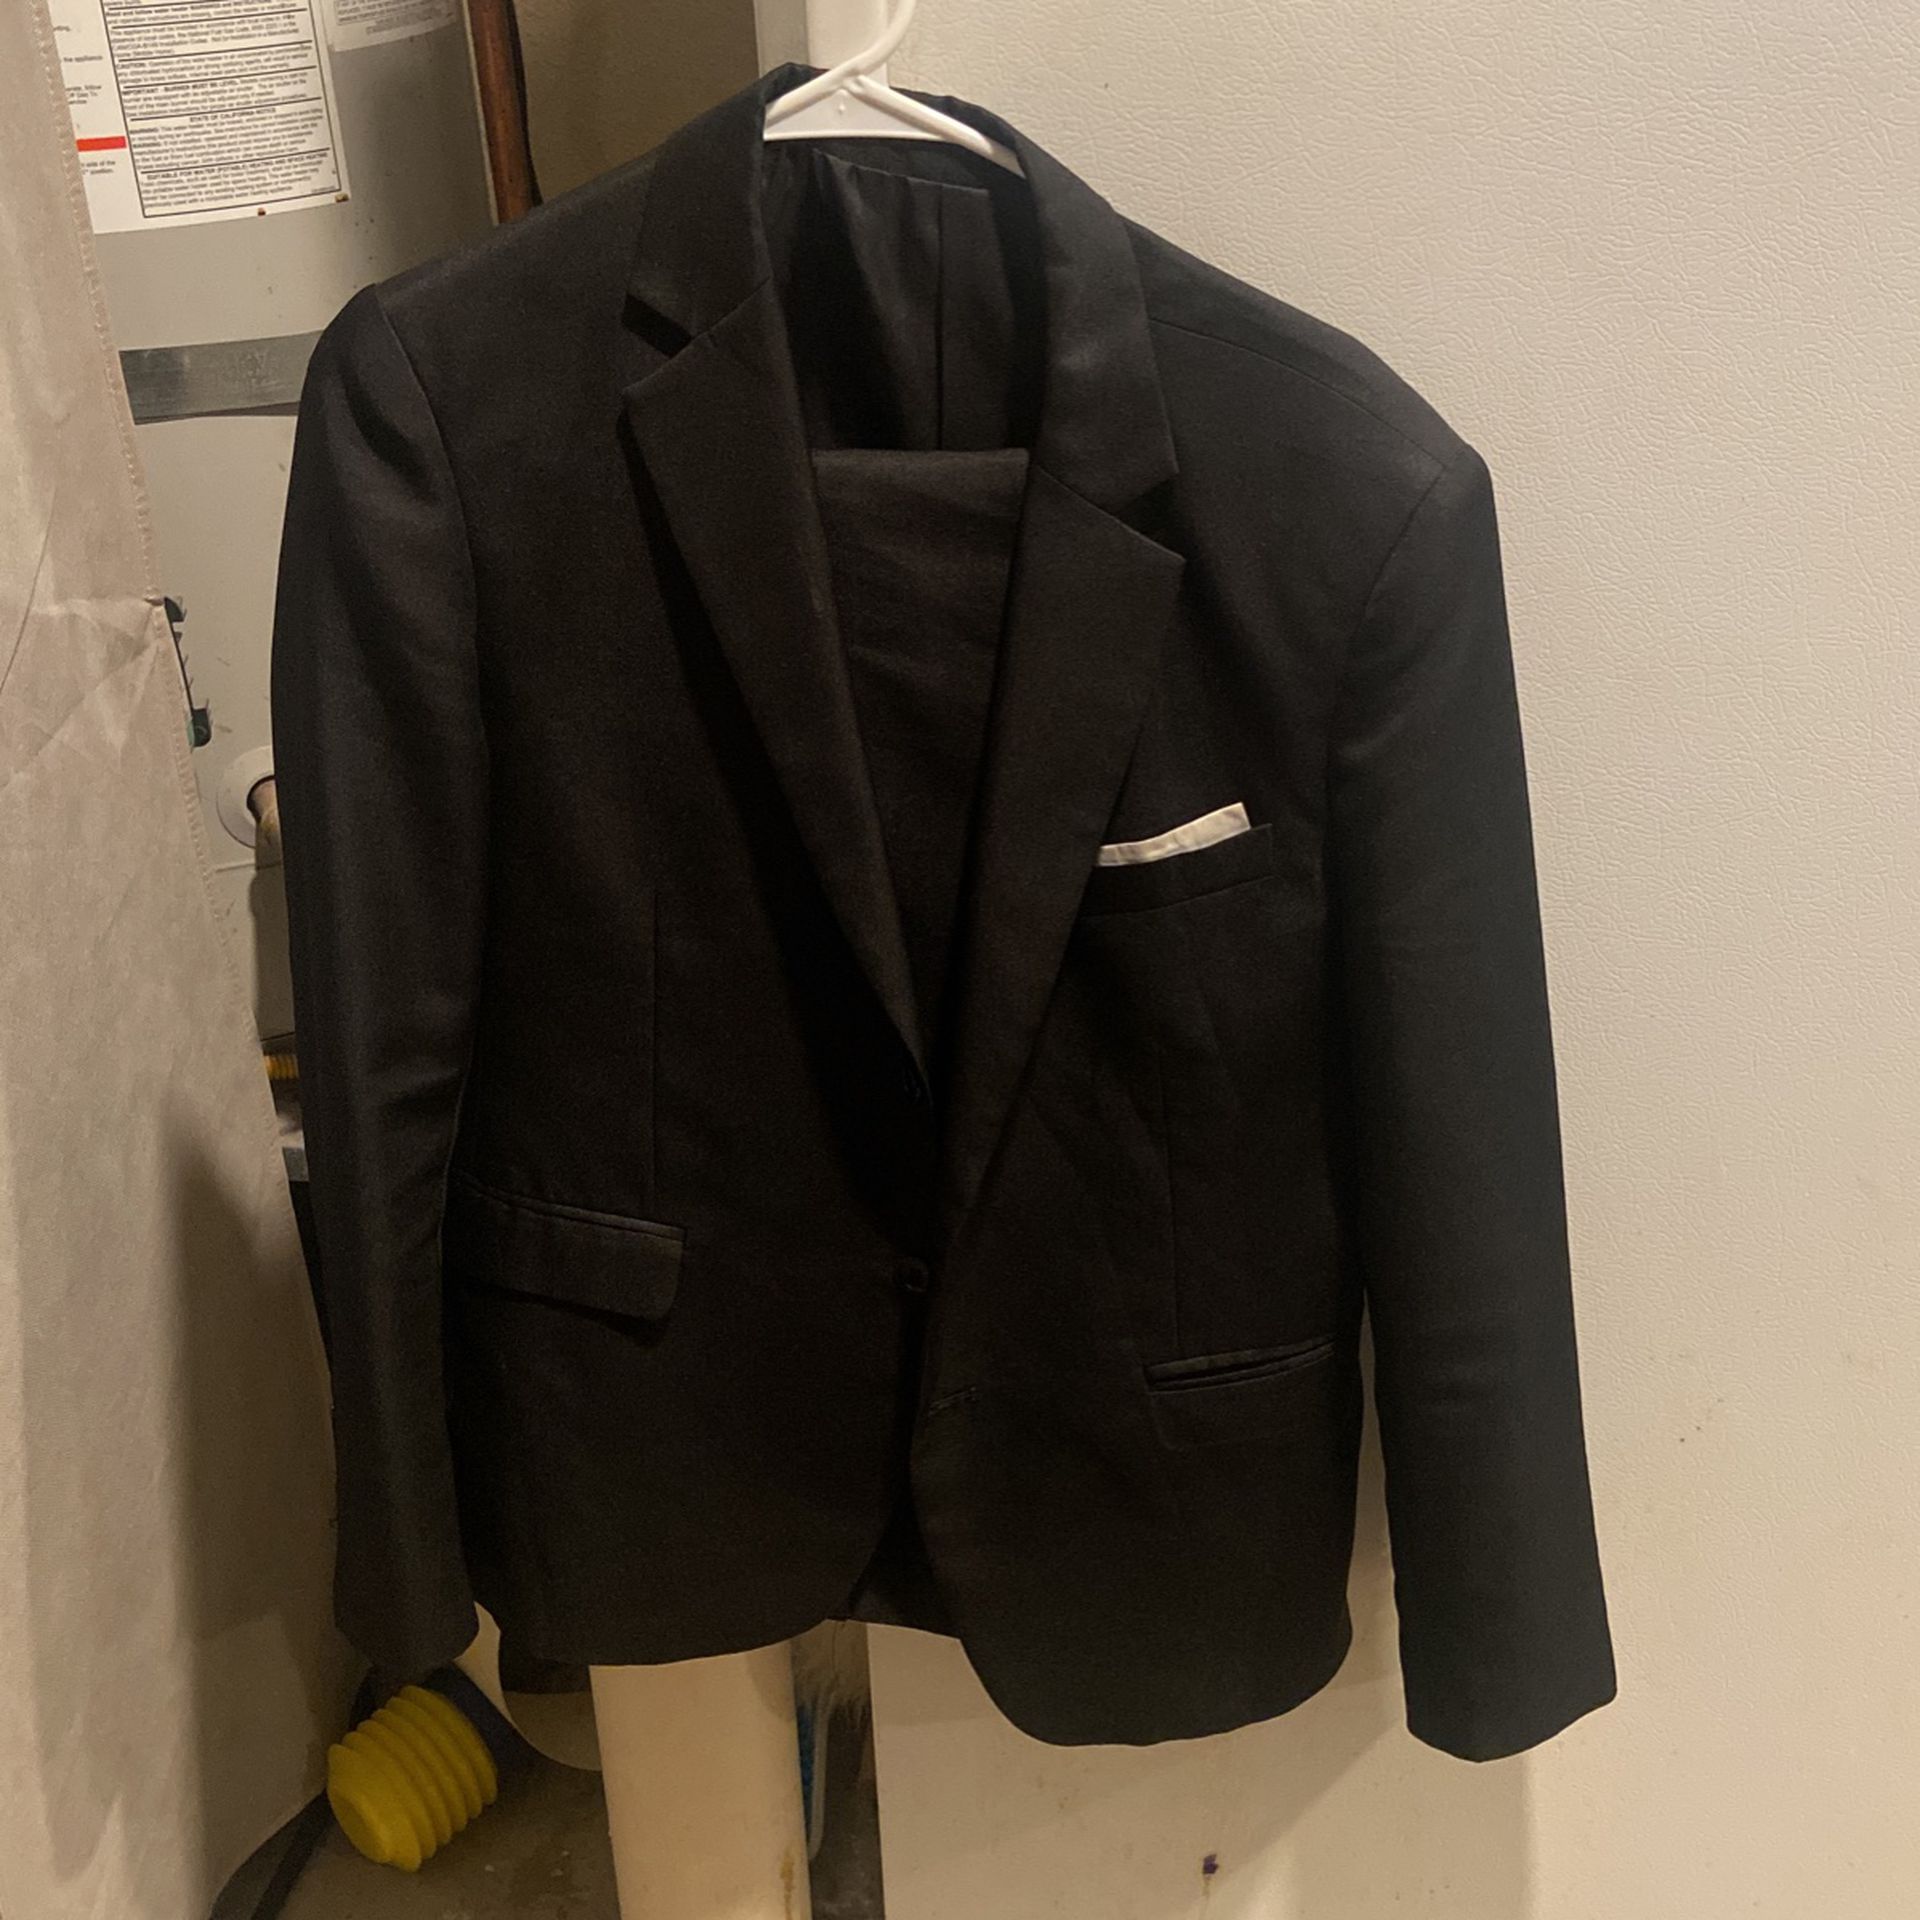 Black Fancy Tuxedo, Pants And Vest Included